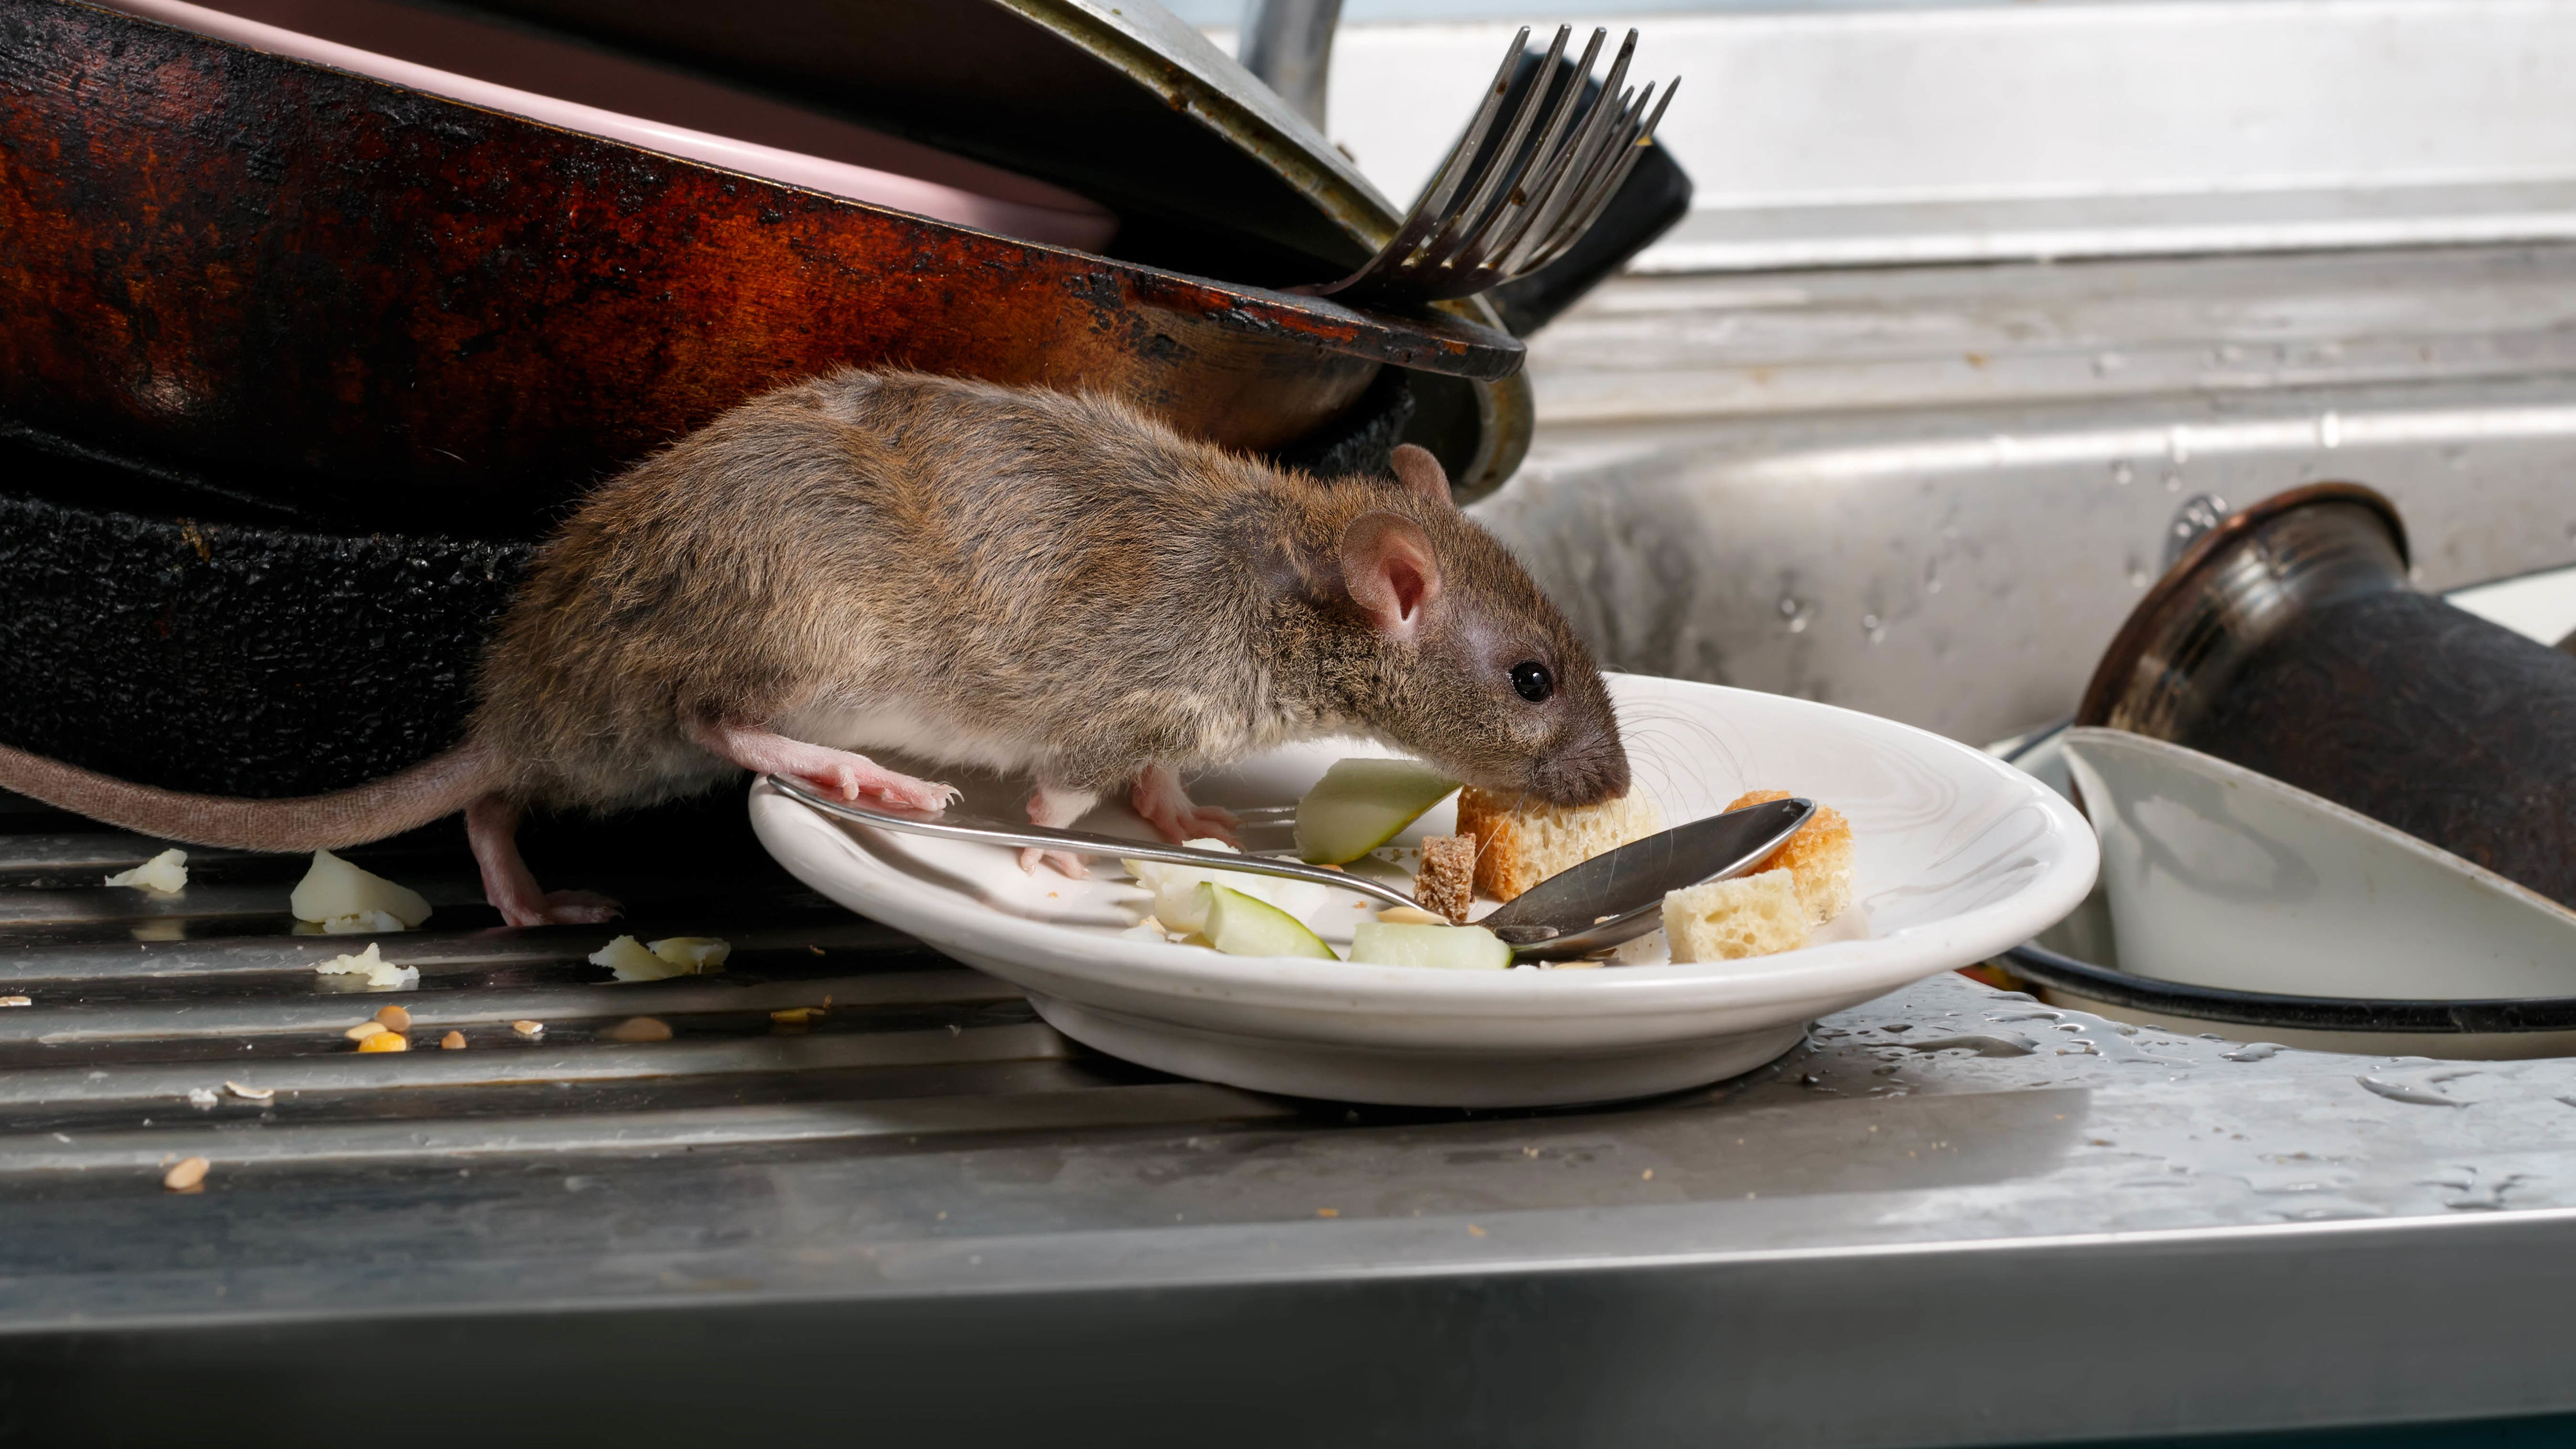 5 ways to tell the difference between mice or rats in your home